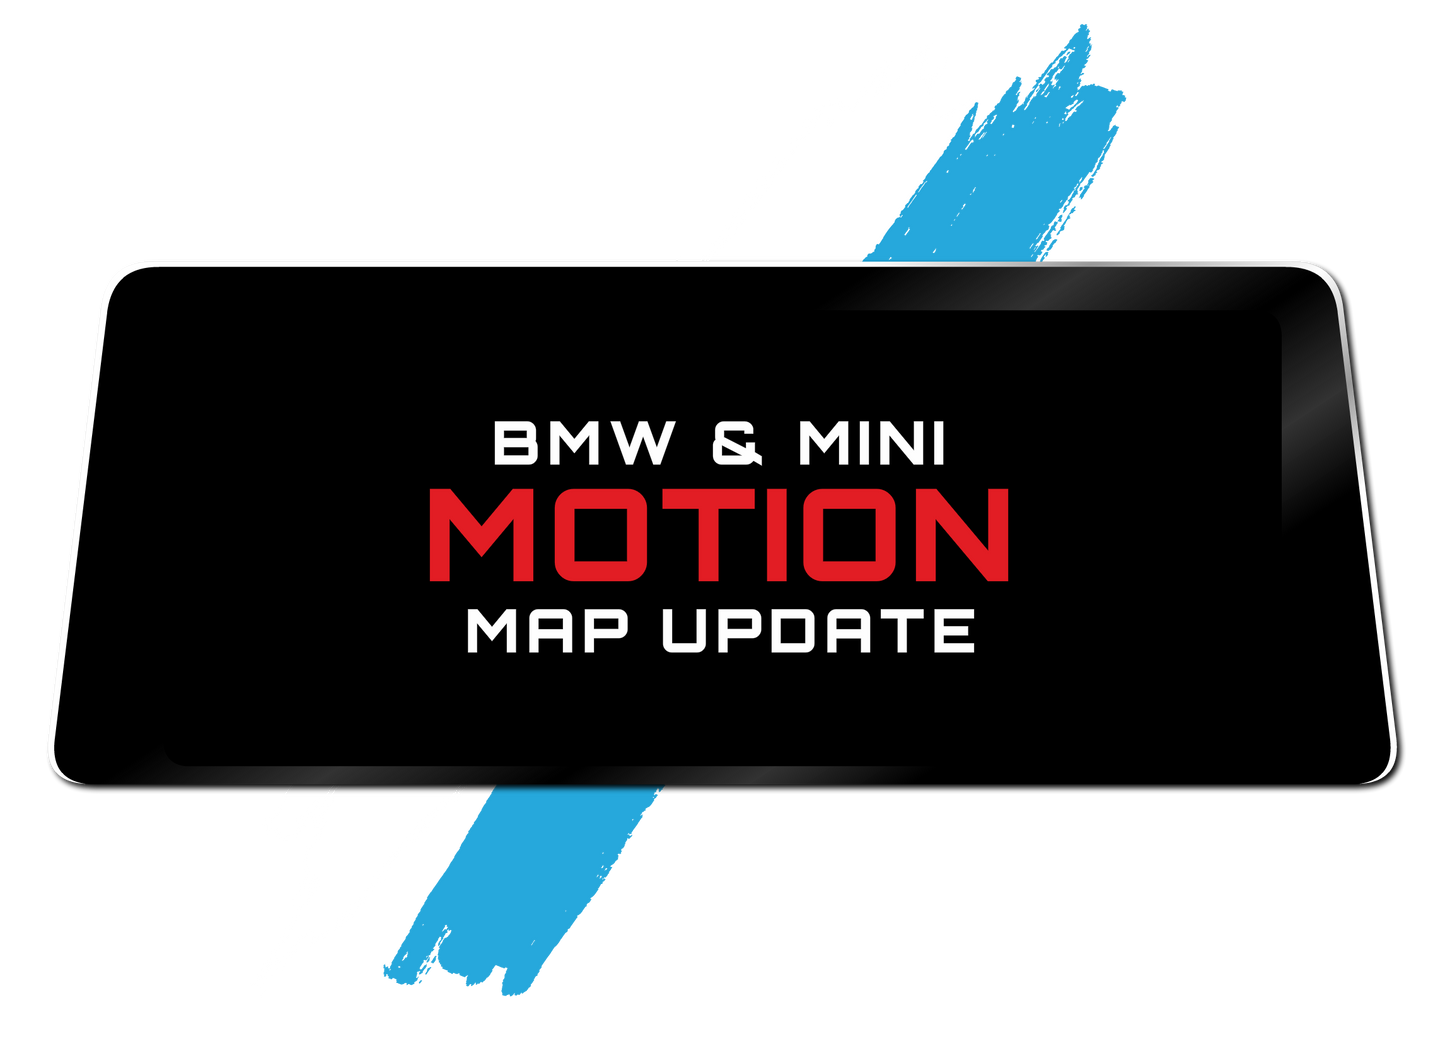 bmw and mini motion map update